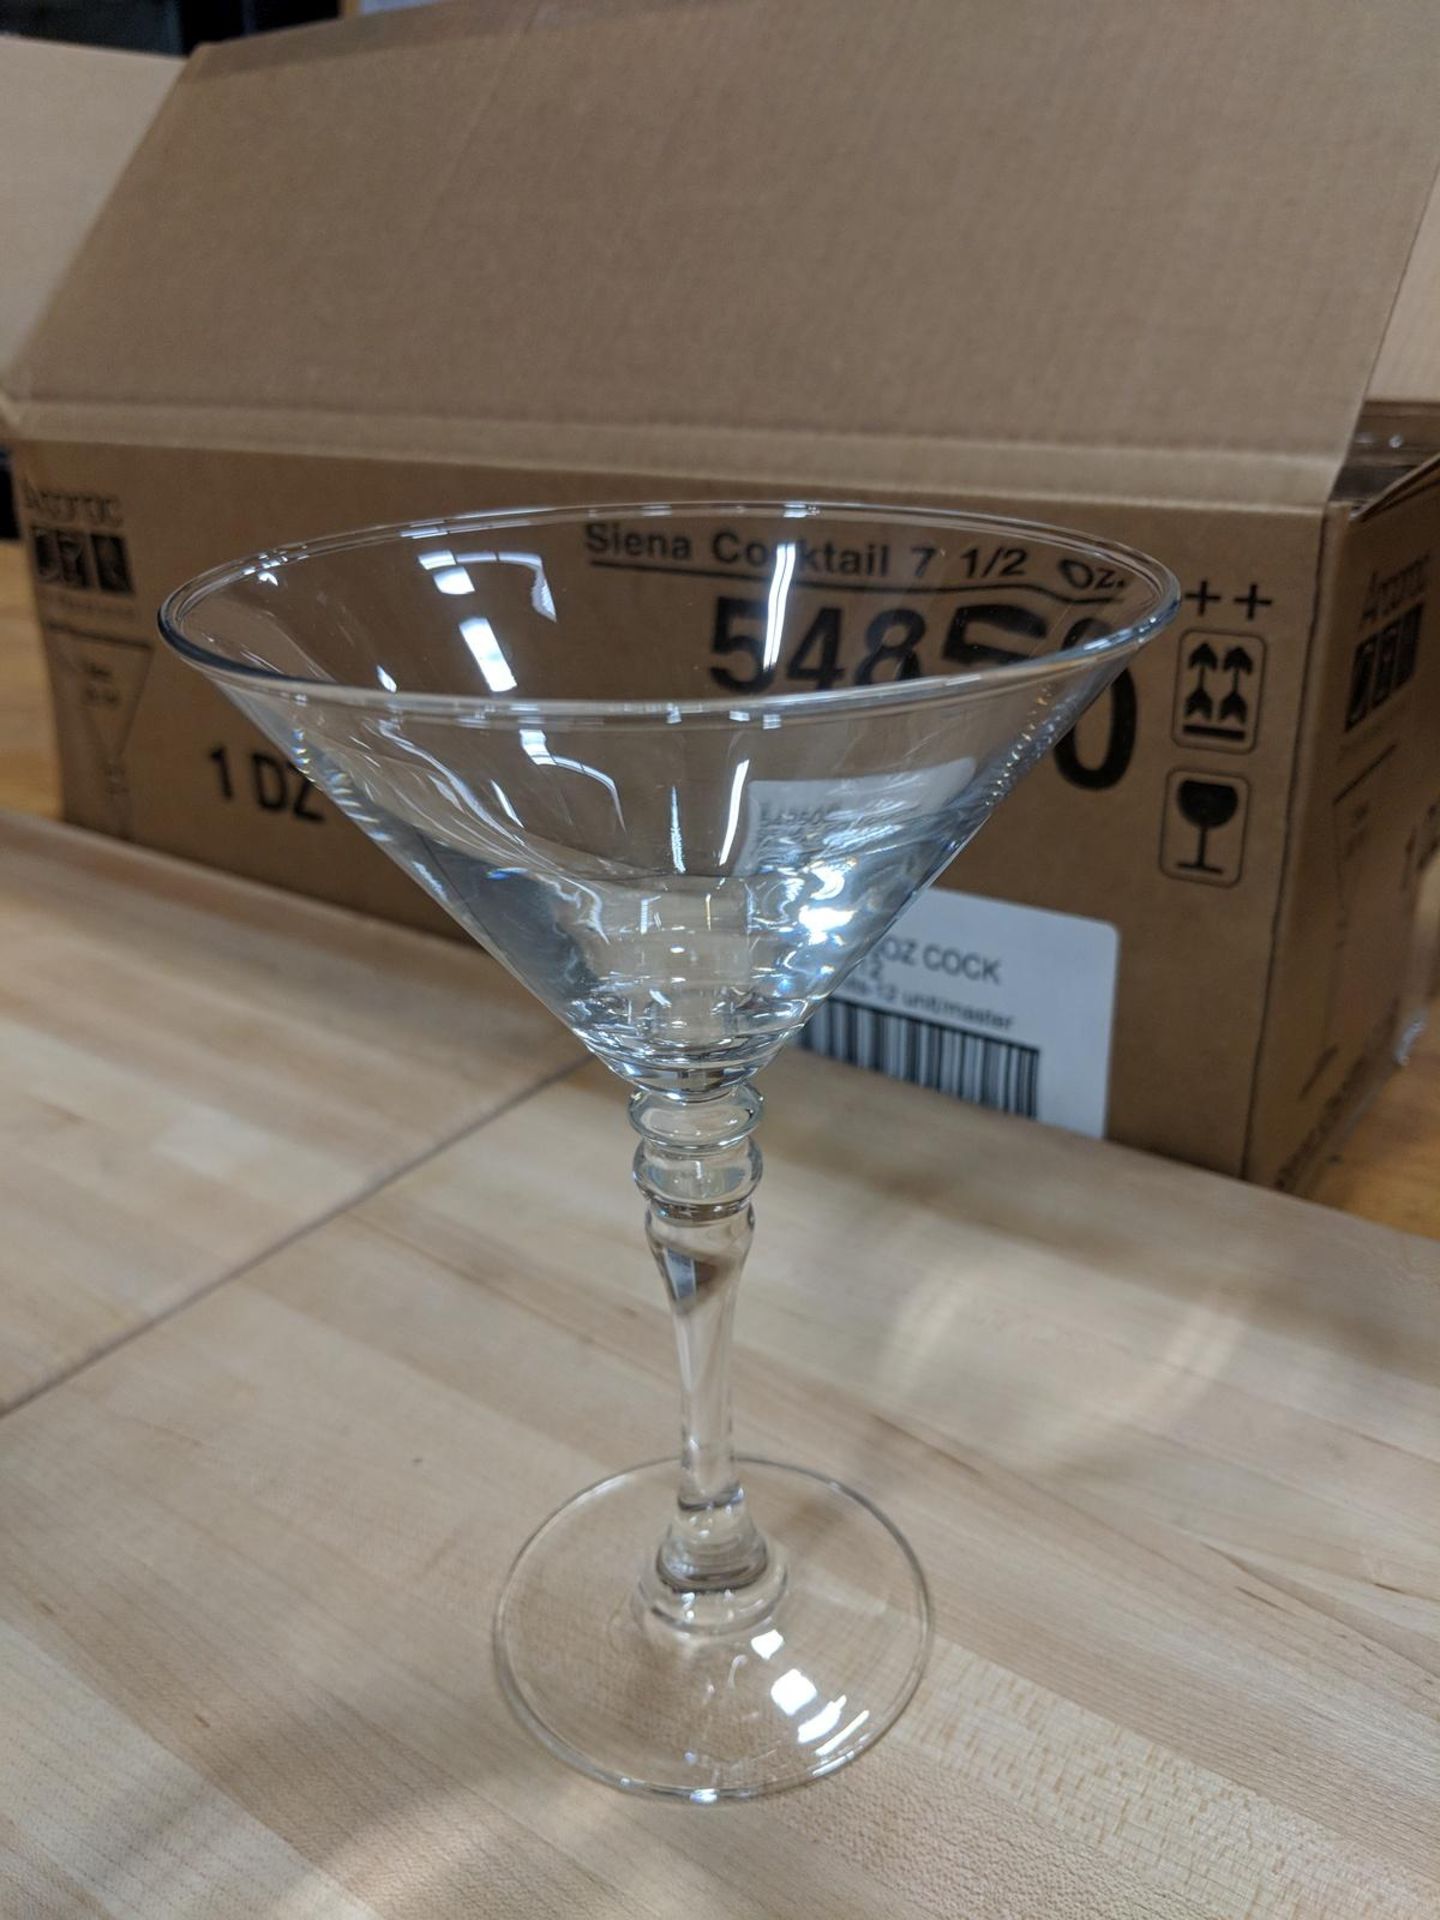 7.5oz/220ml Sienna Cocktail Glasses - Lot of 12 (1 Case), Arcoroc 54850 - Image 2 of 3